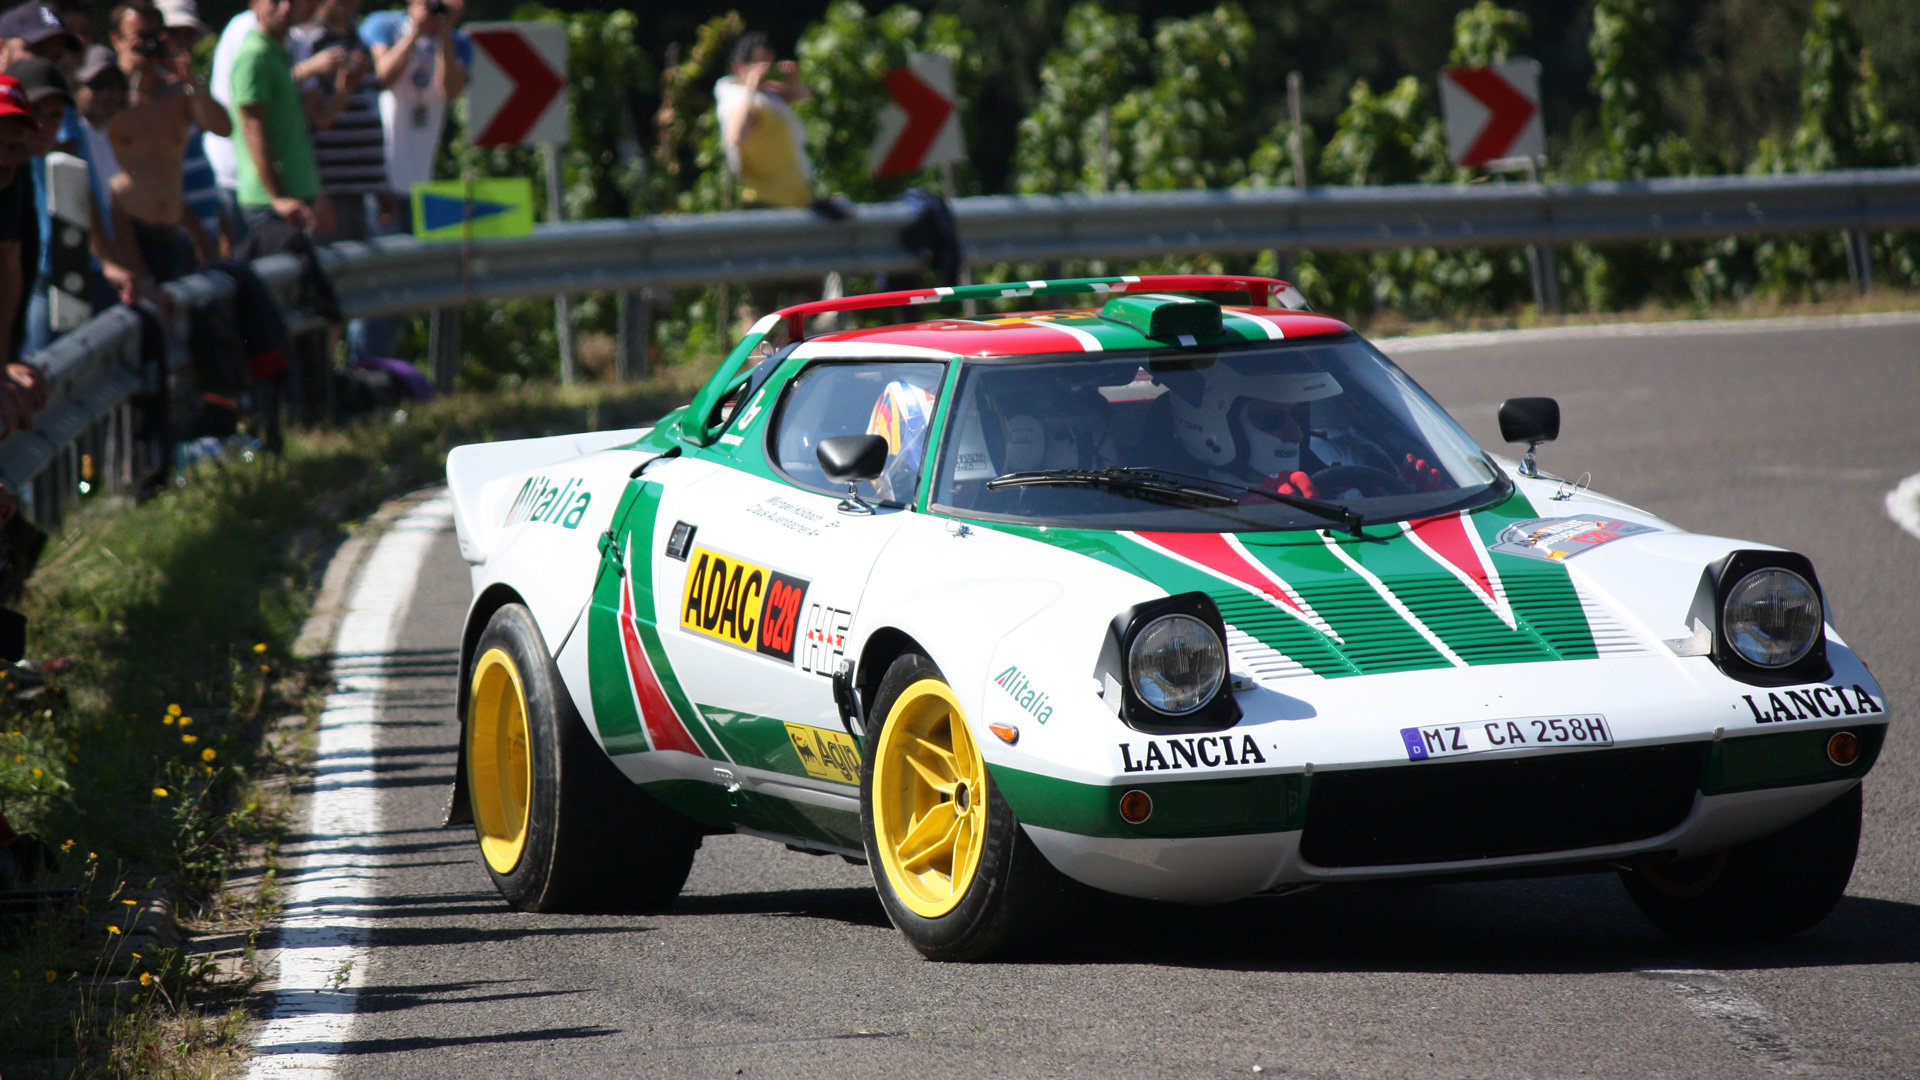 Lancia Stratos wallpapers, High-definition backgrounds, 1920x1080 Full HD Desktop